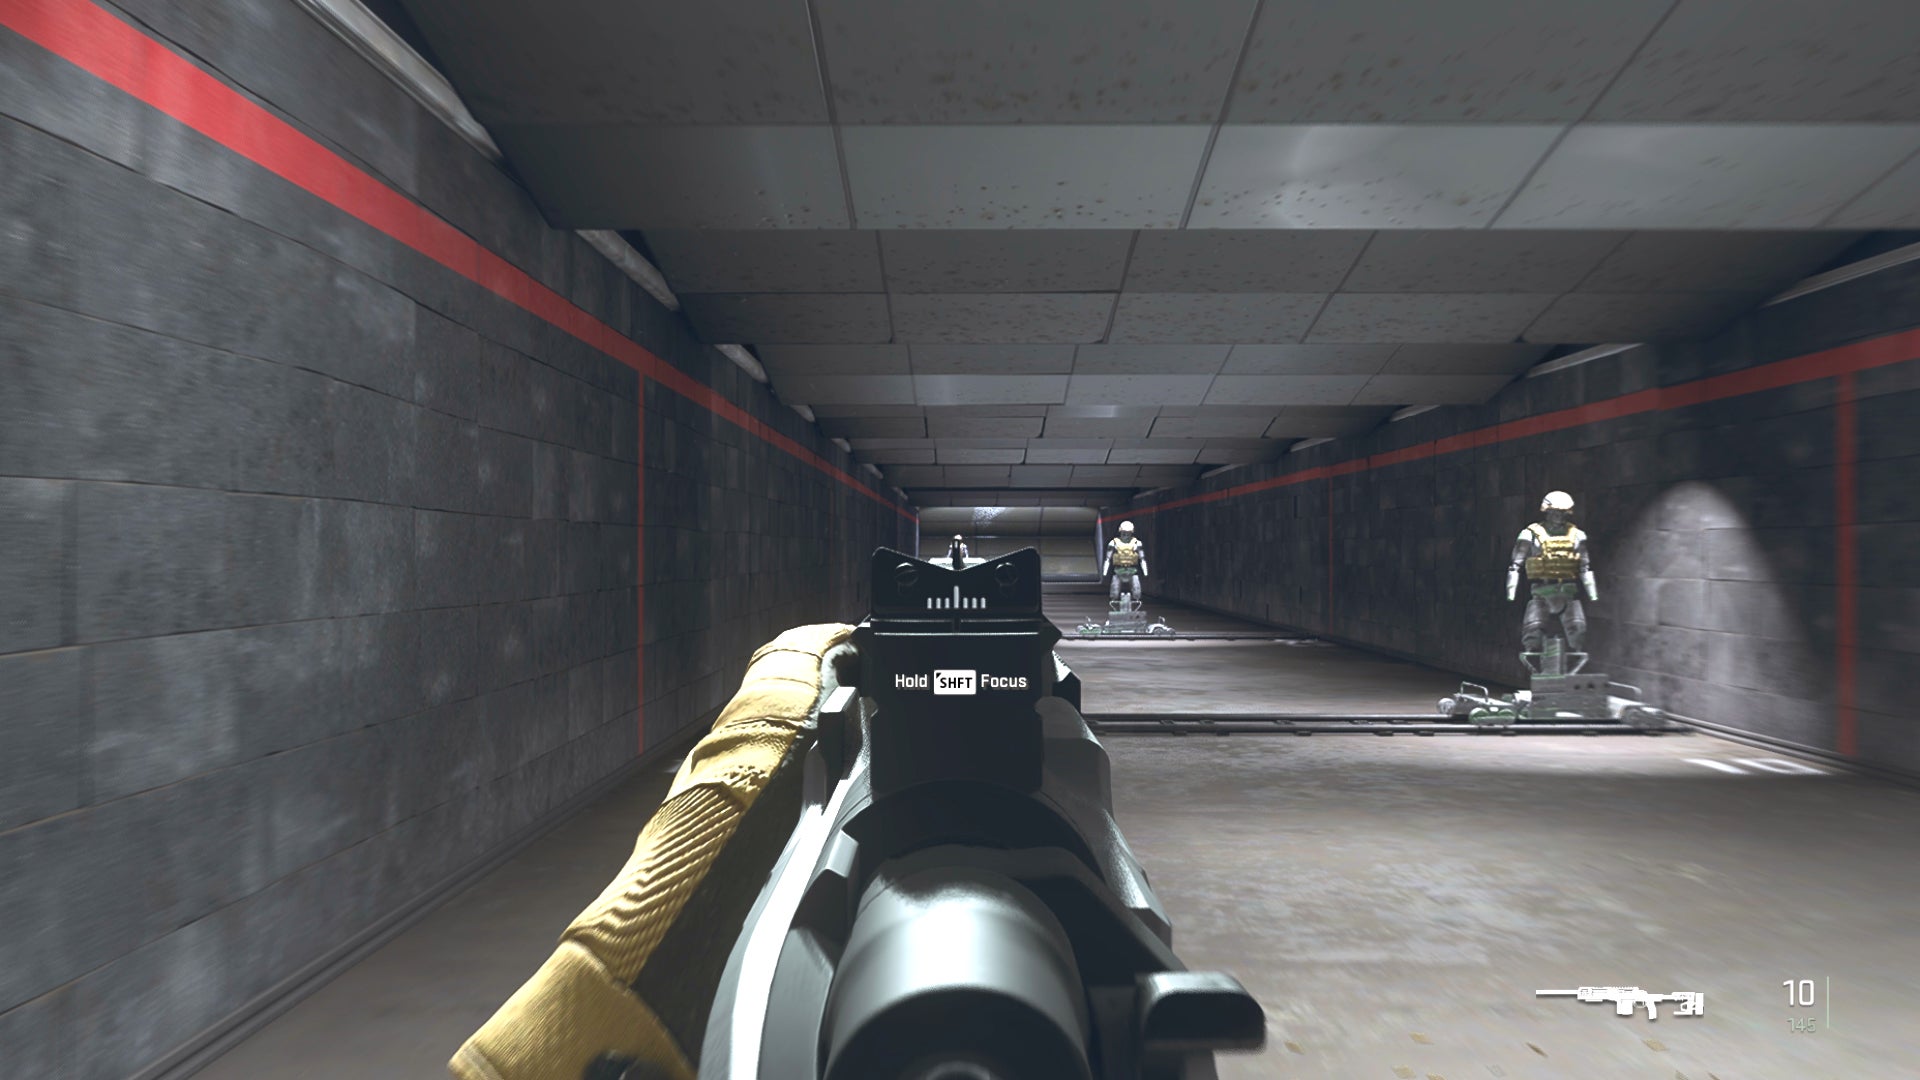 The player in Warzone 2.0 aims at a training dummy with the SA-B 50 ironsights.